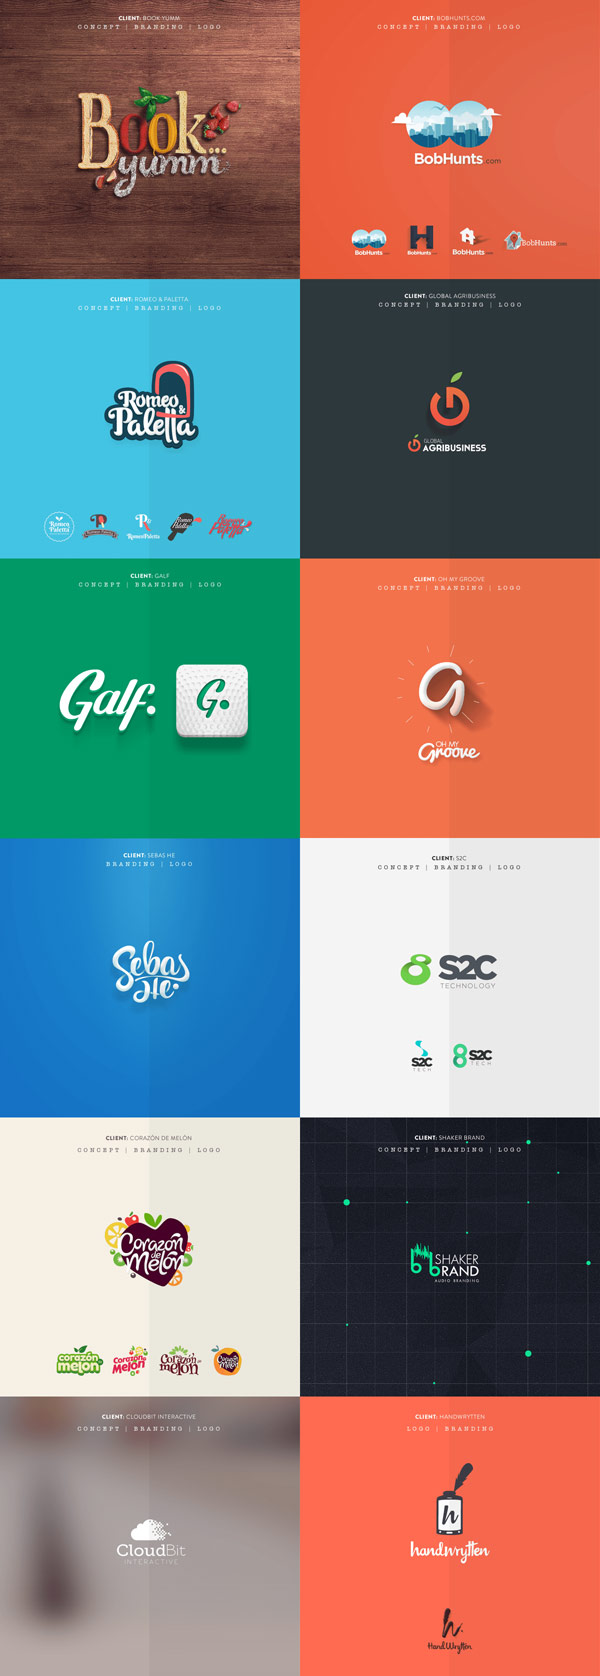 A collection of logos, graphics, and icons created by Fixed Agency, a creative team based in New York City.